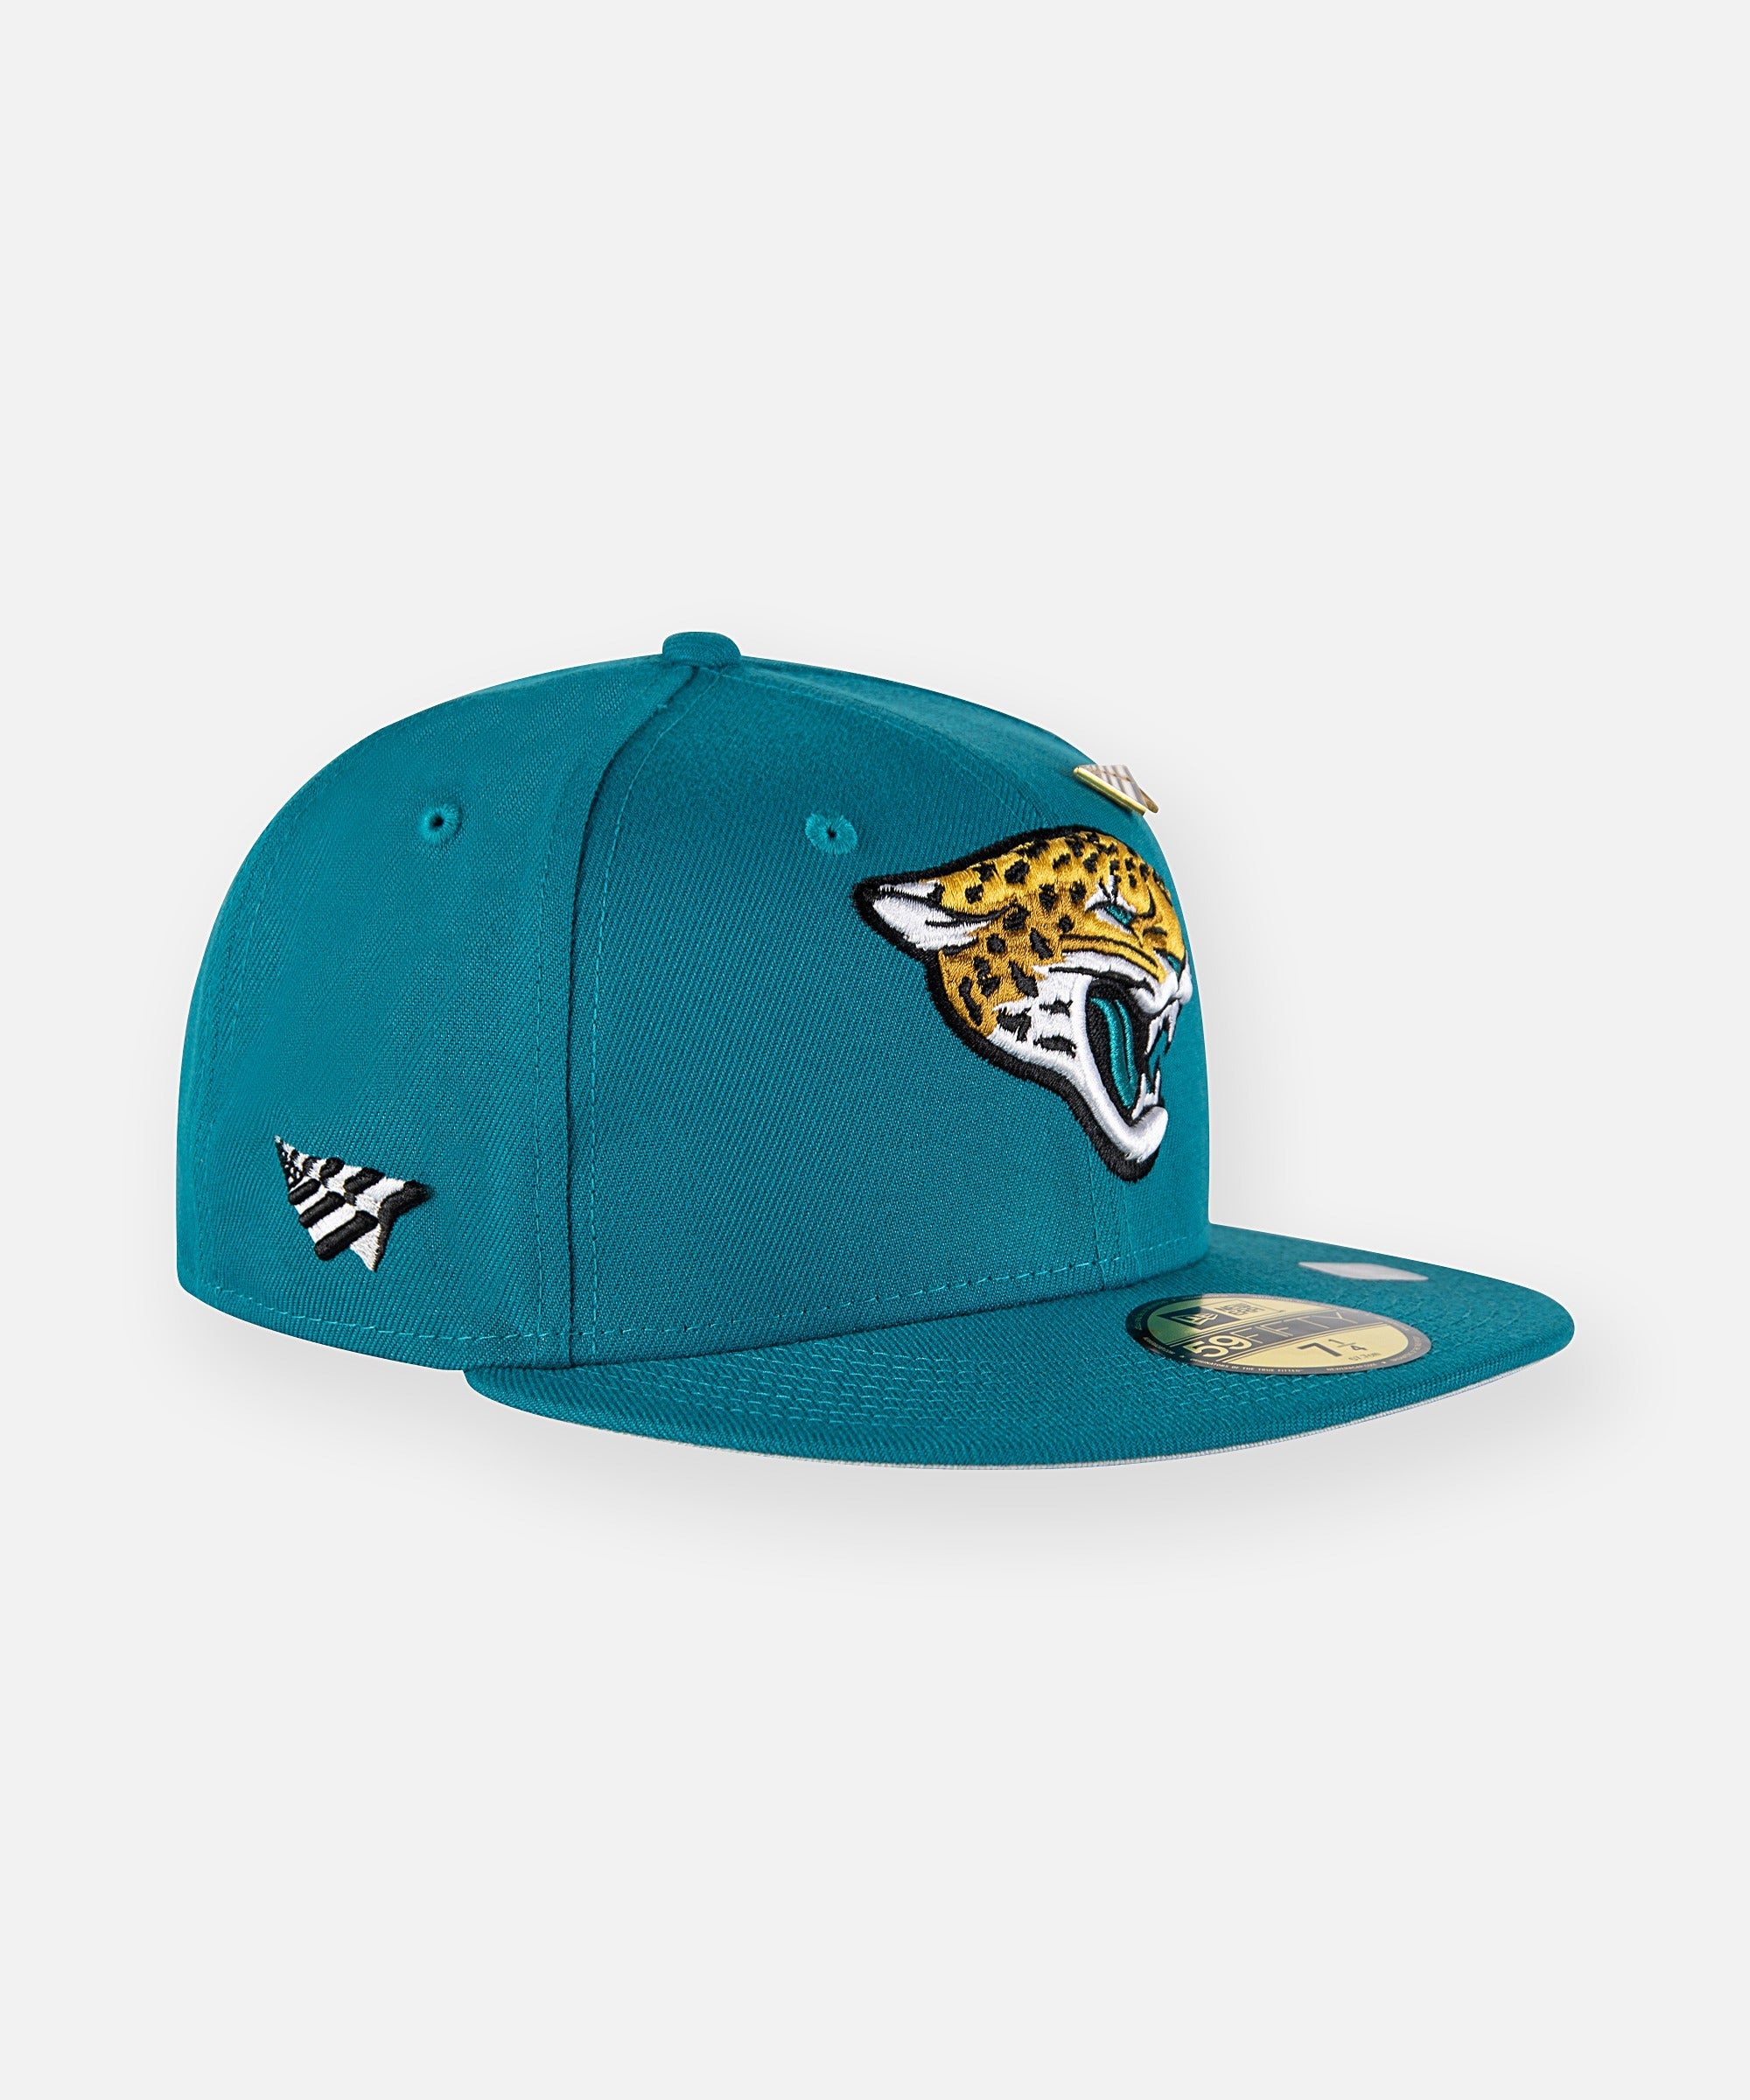 Paper Planes x Jacksonville Jaguars Team Color 59Fifty Fitted Hat